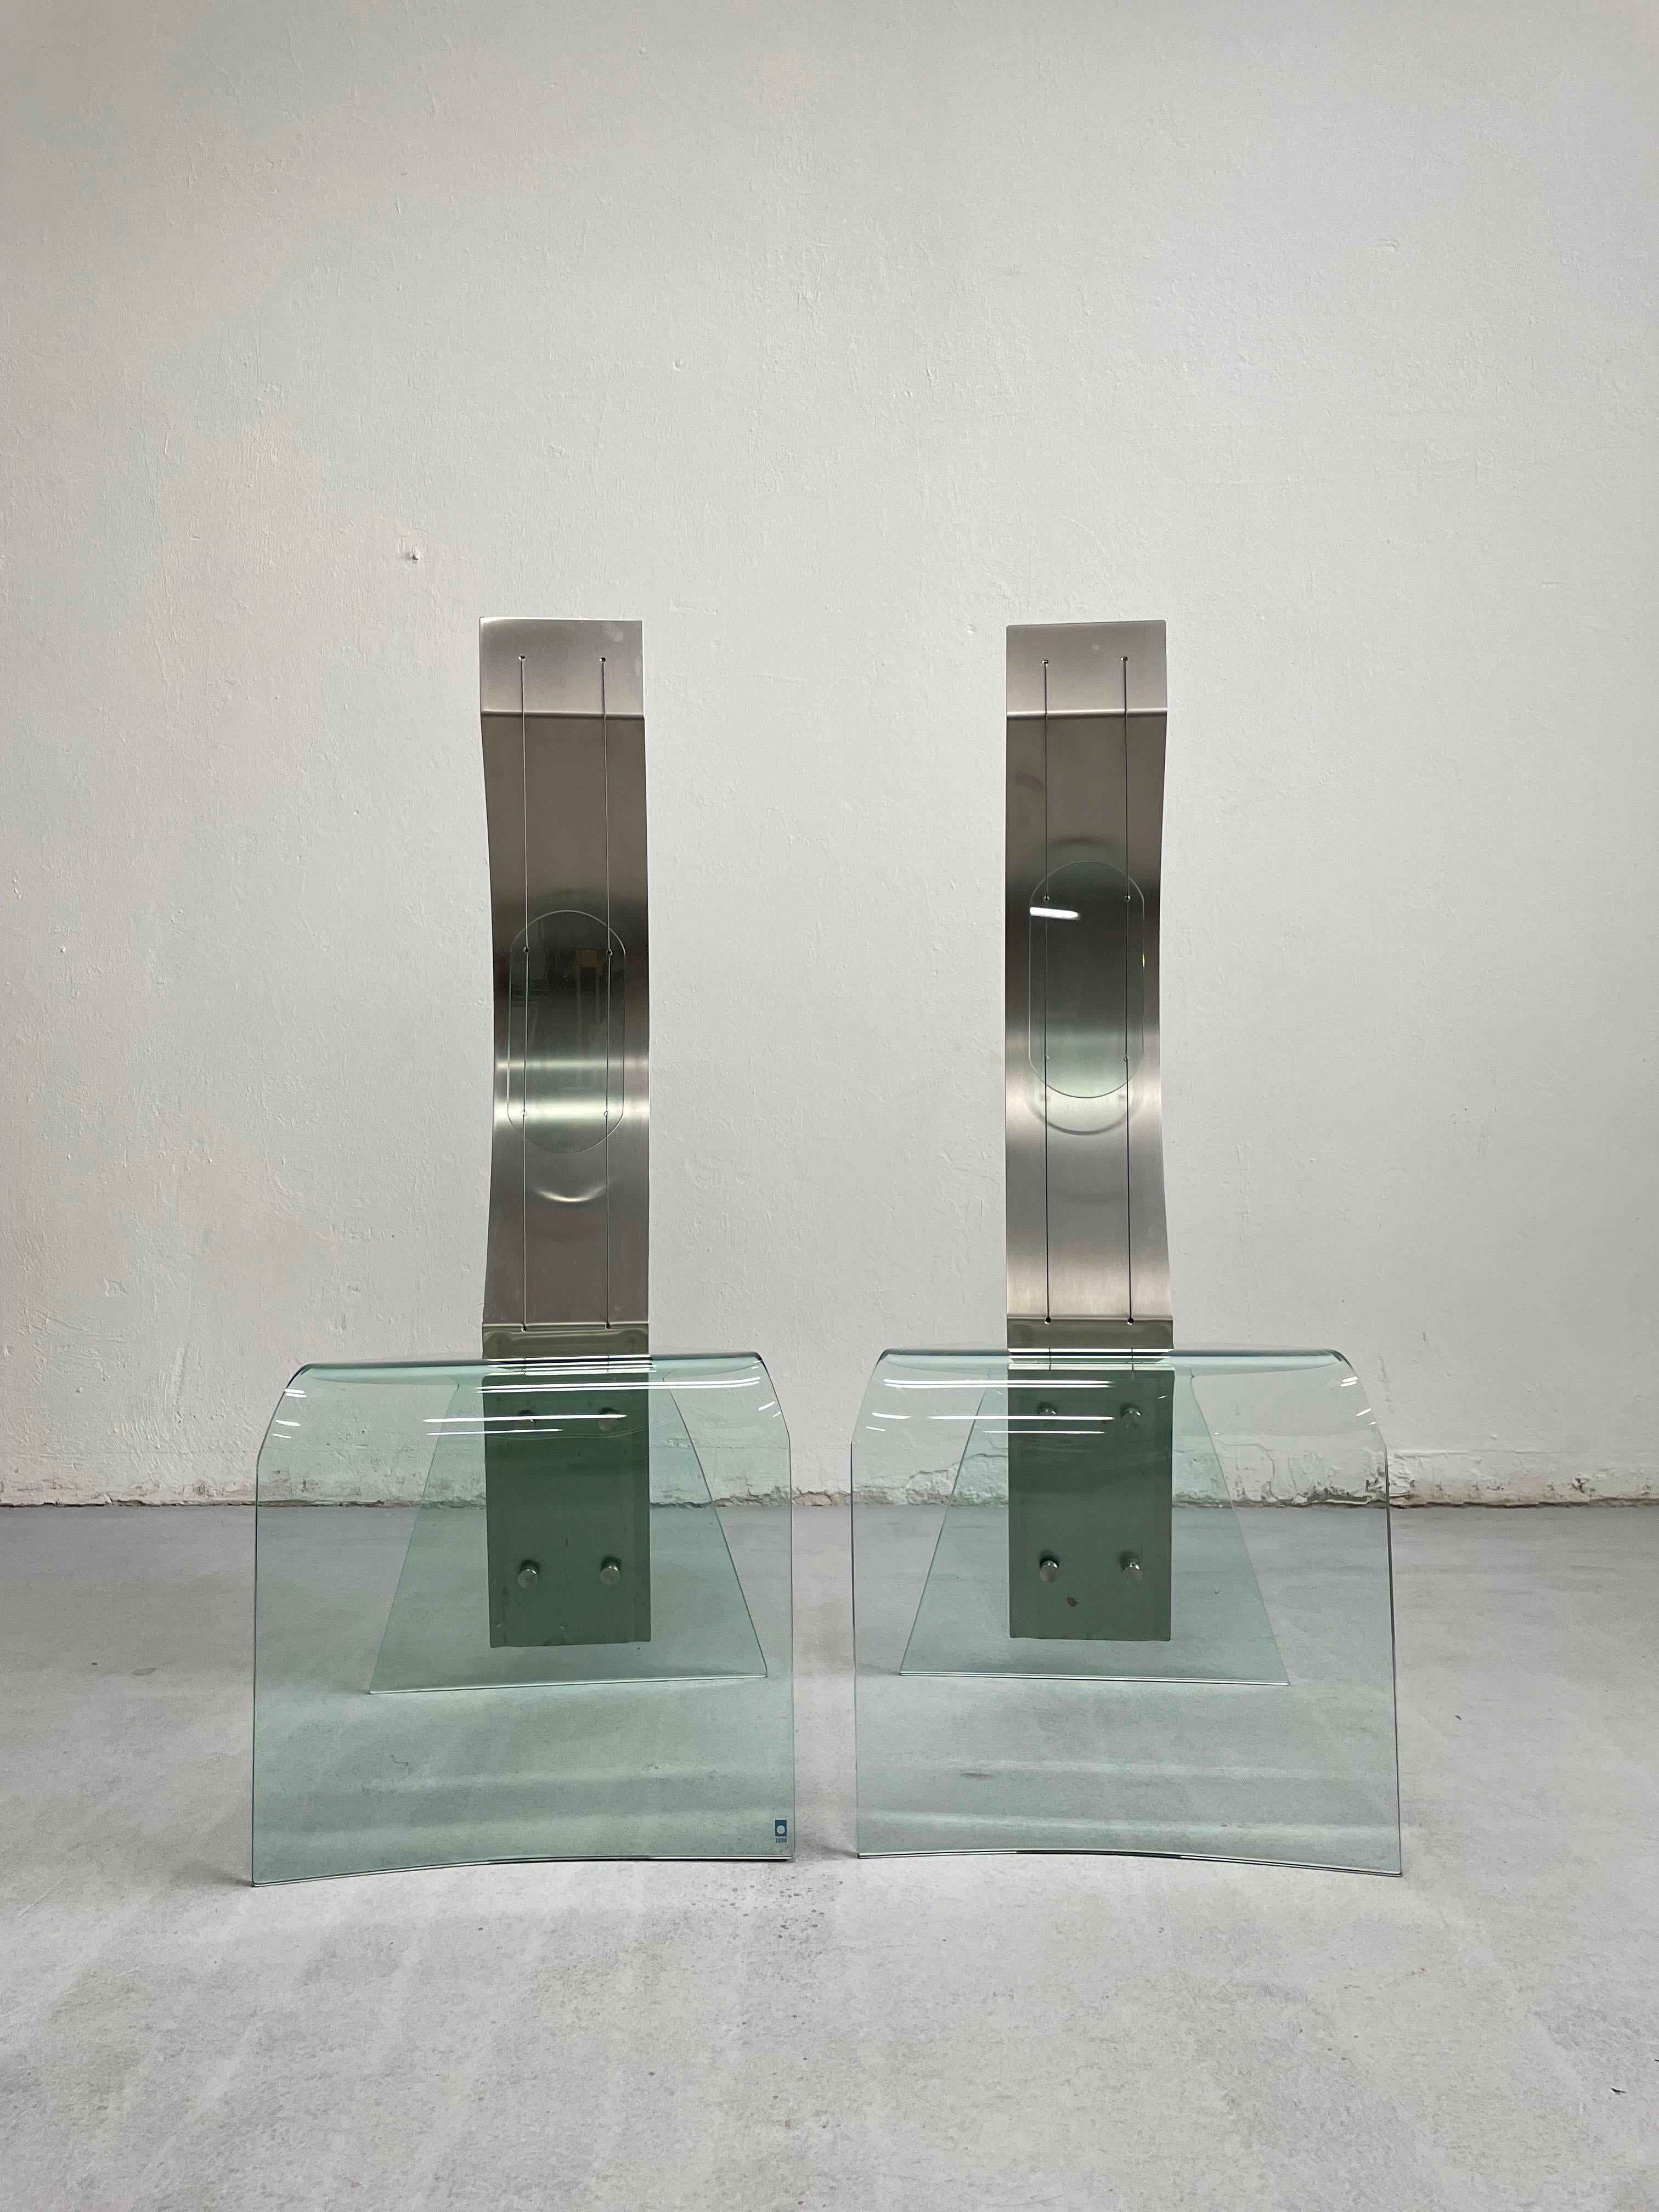 Pair of Modern Shiro Kuramata Style Glass and Steel Chairs, 1980s / 1990s  In Good Condition For Sale In Zagreb, HR